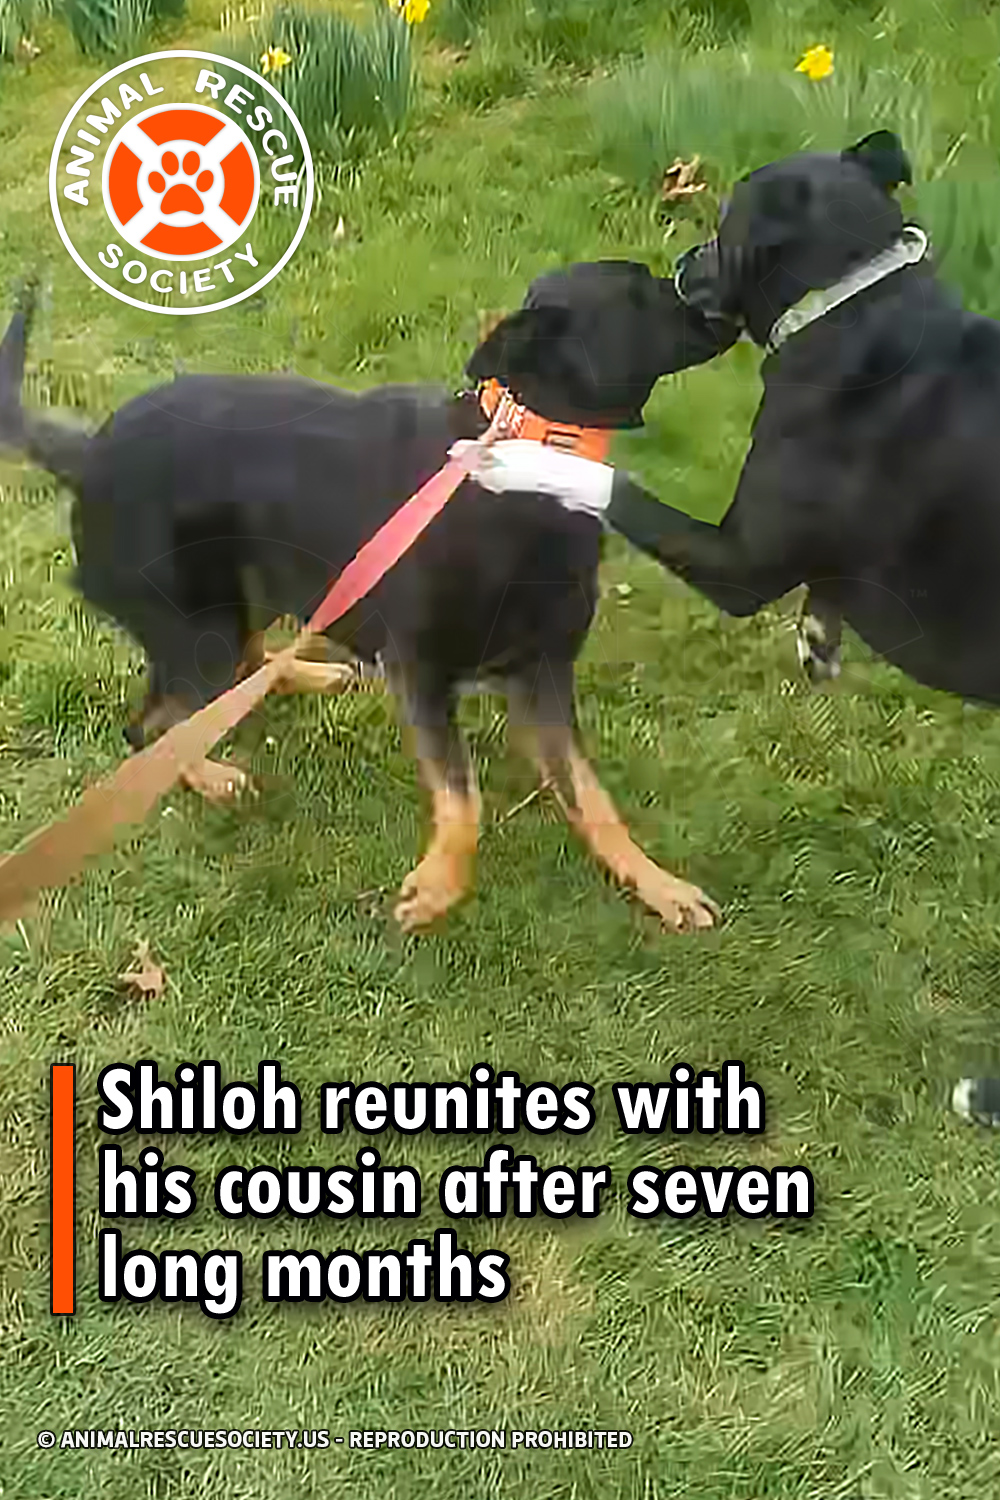 Shiloh reunites with his cousin after seven long months